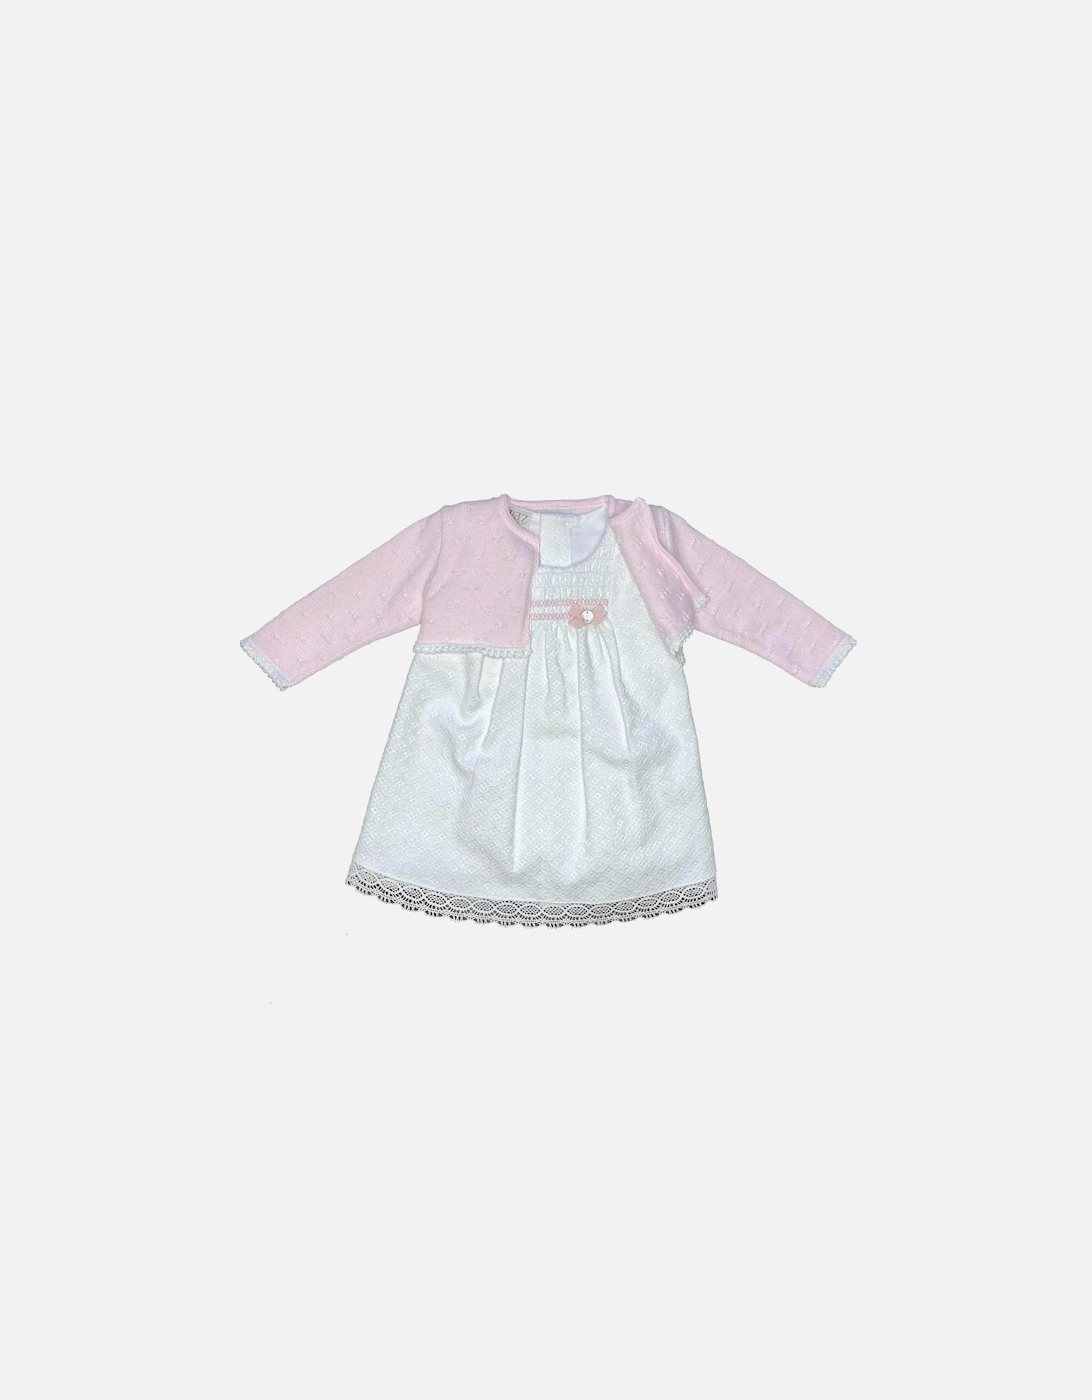 White Woven Dress and Pink Cardigan Set, 4 of 3